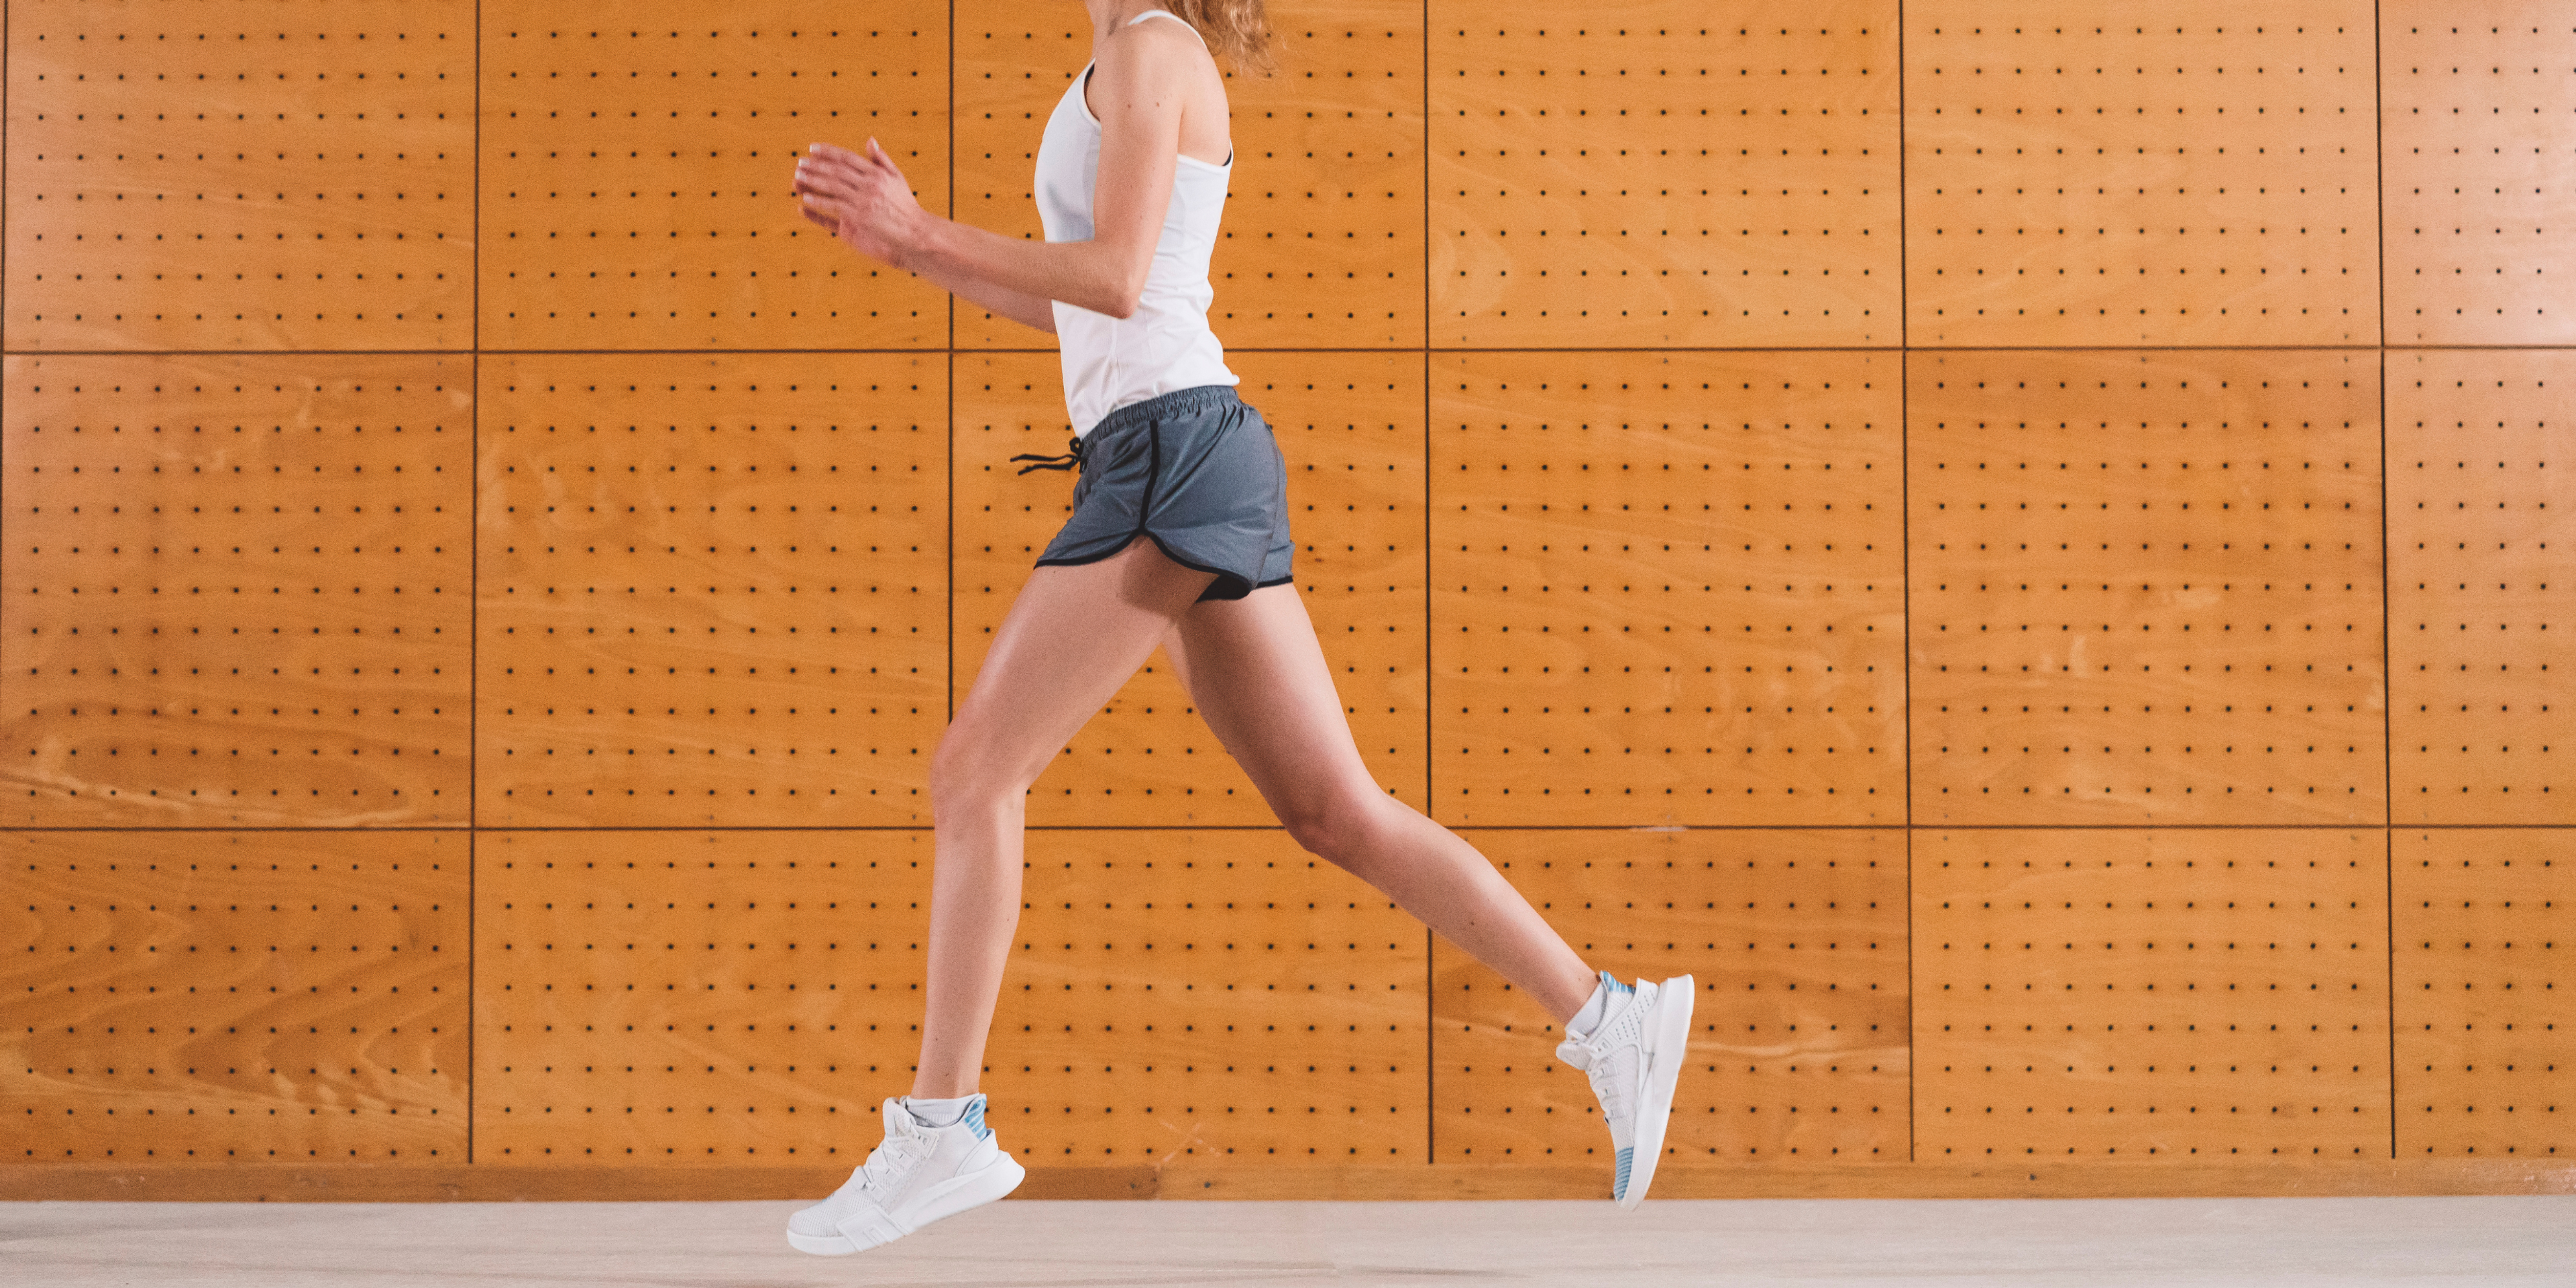 If you do running sports, your final hamstring strain exercises must include plyometrics (jumping and hopping).